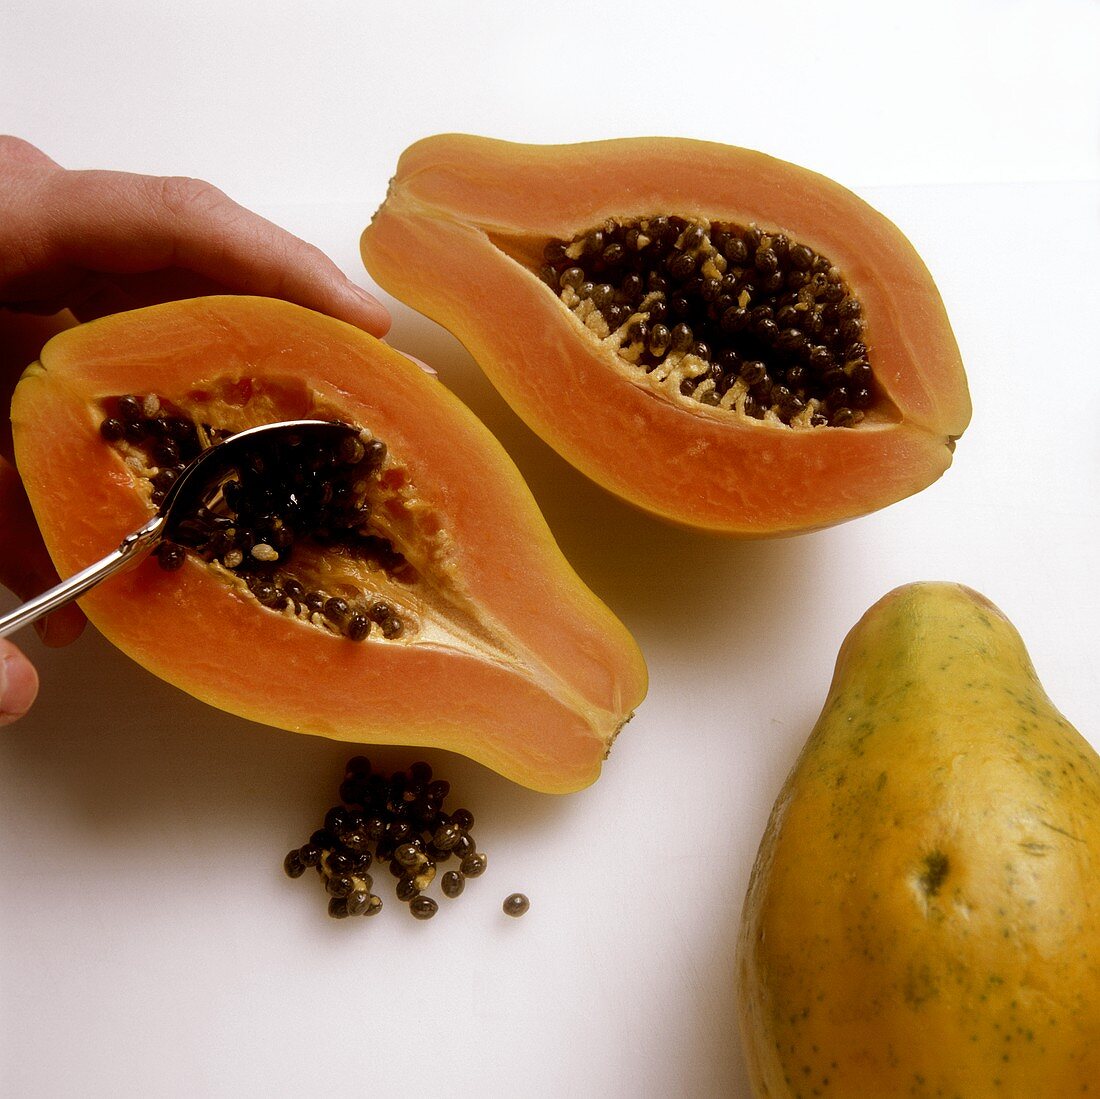 Scraping out papaya seeds with a spoon